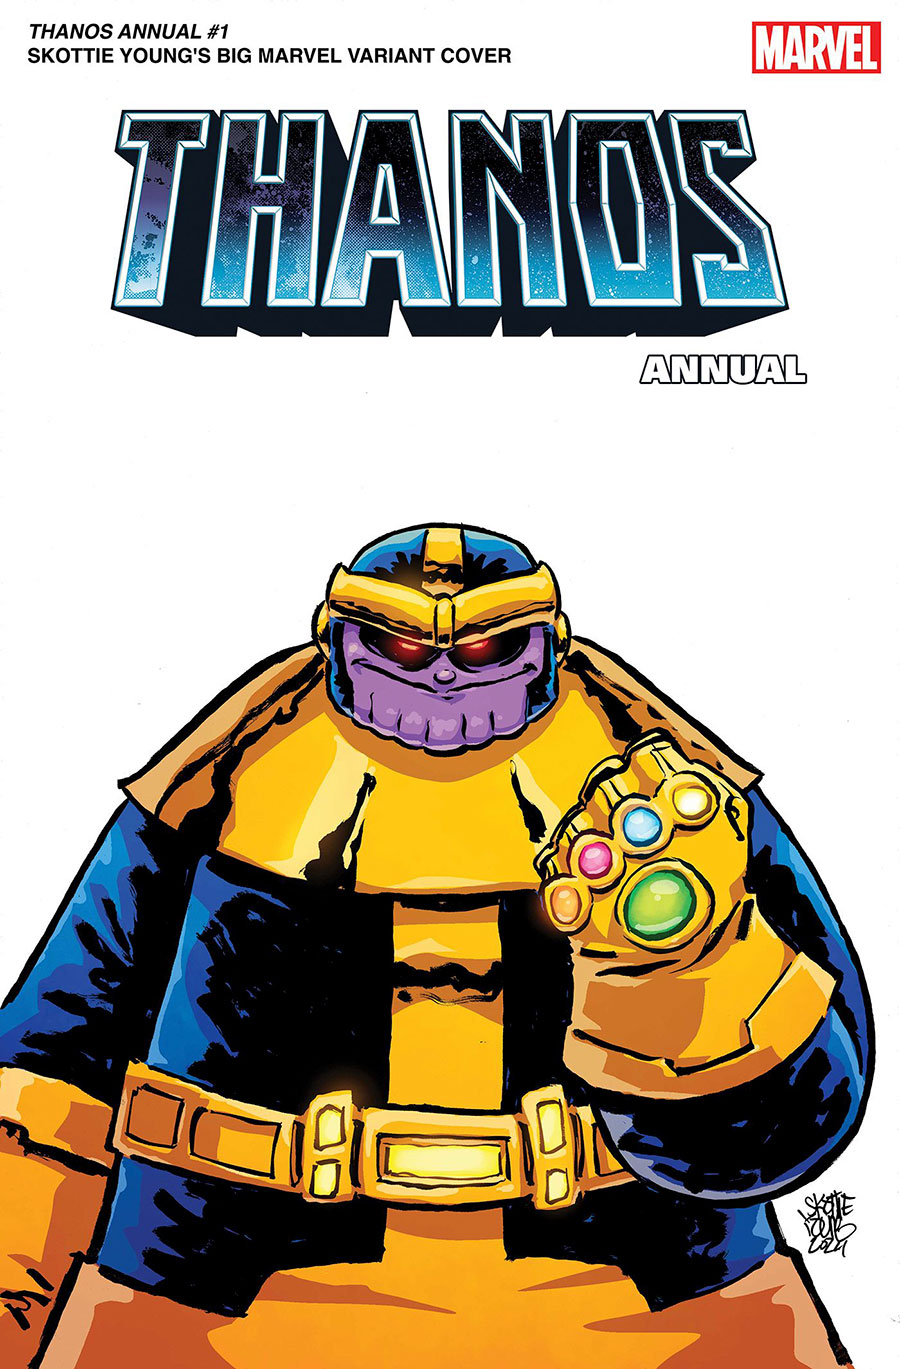 Thanos Vol 4 Annual #1 (One Shot) Cover B Variant Skottie Youngs Big Marvels Cover (Infinity Watch Part 1)